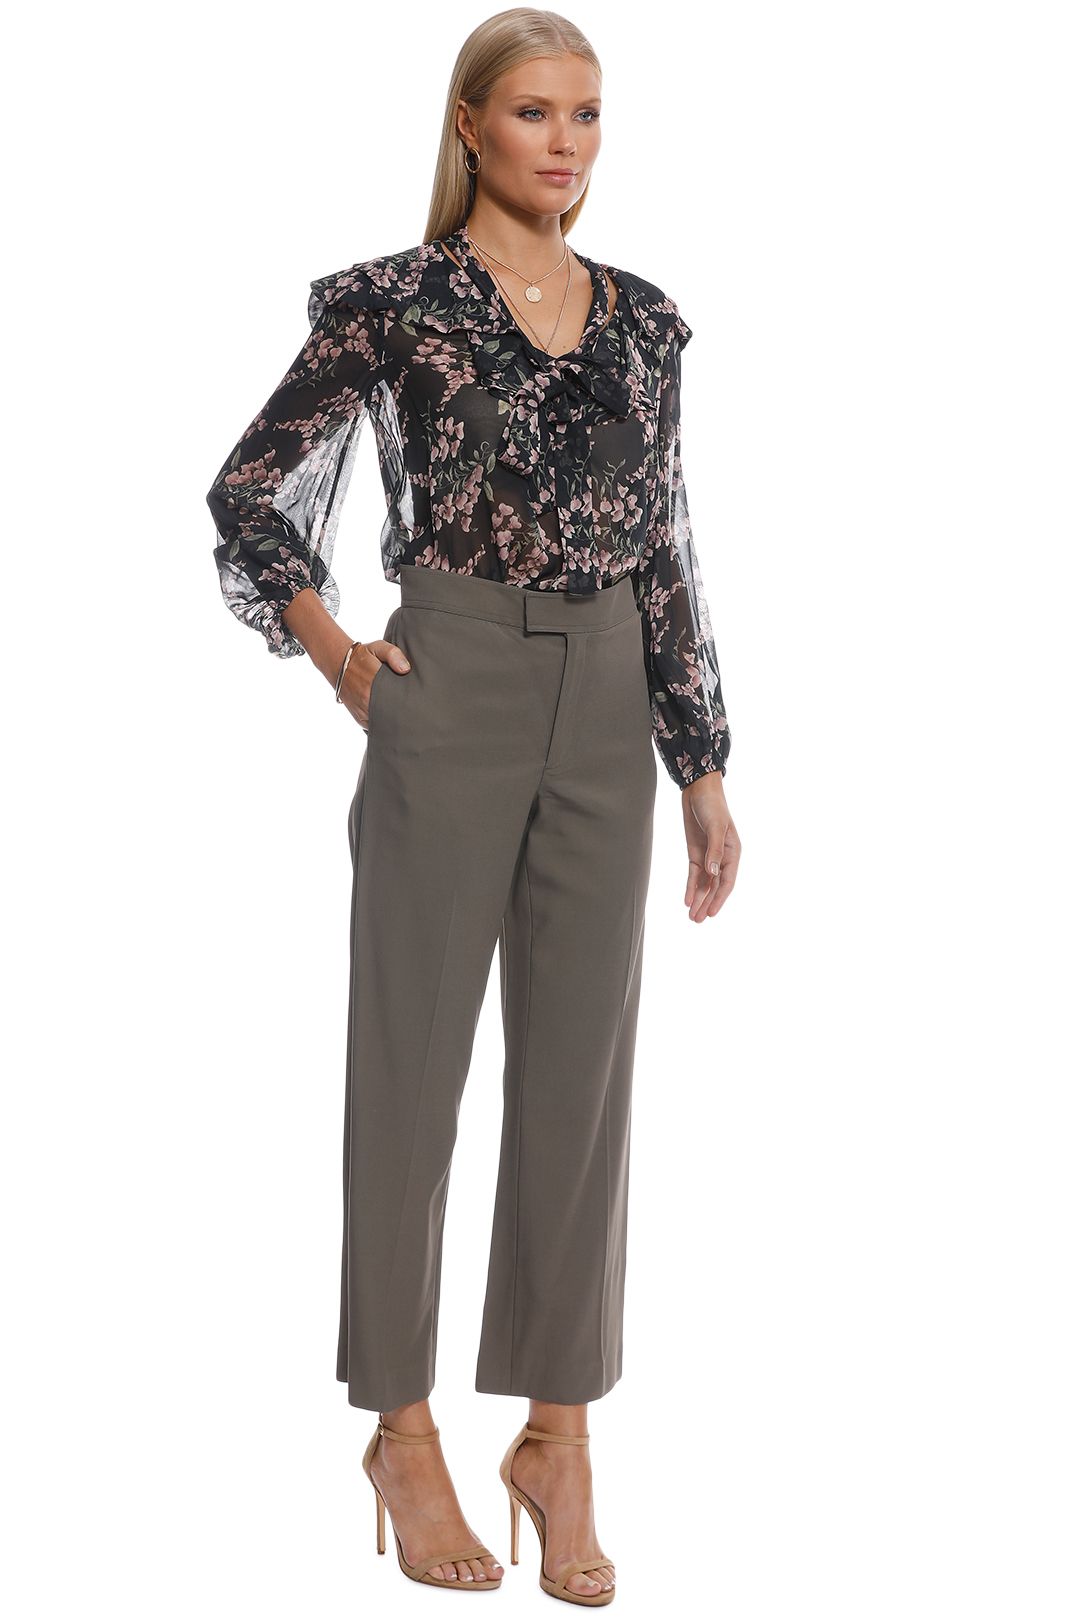 Scanlan Theodore - Crepe Tailored Trouser - Taupe - Side